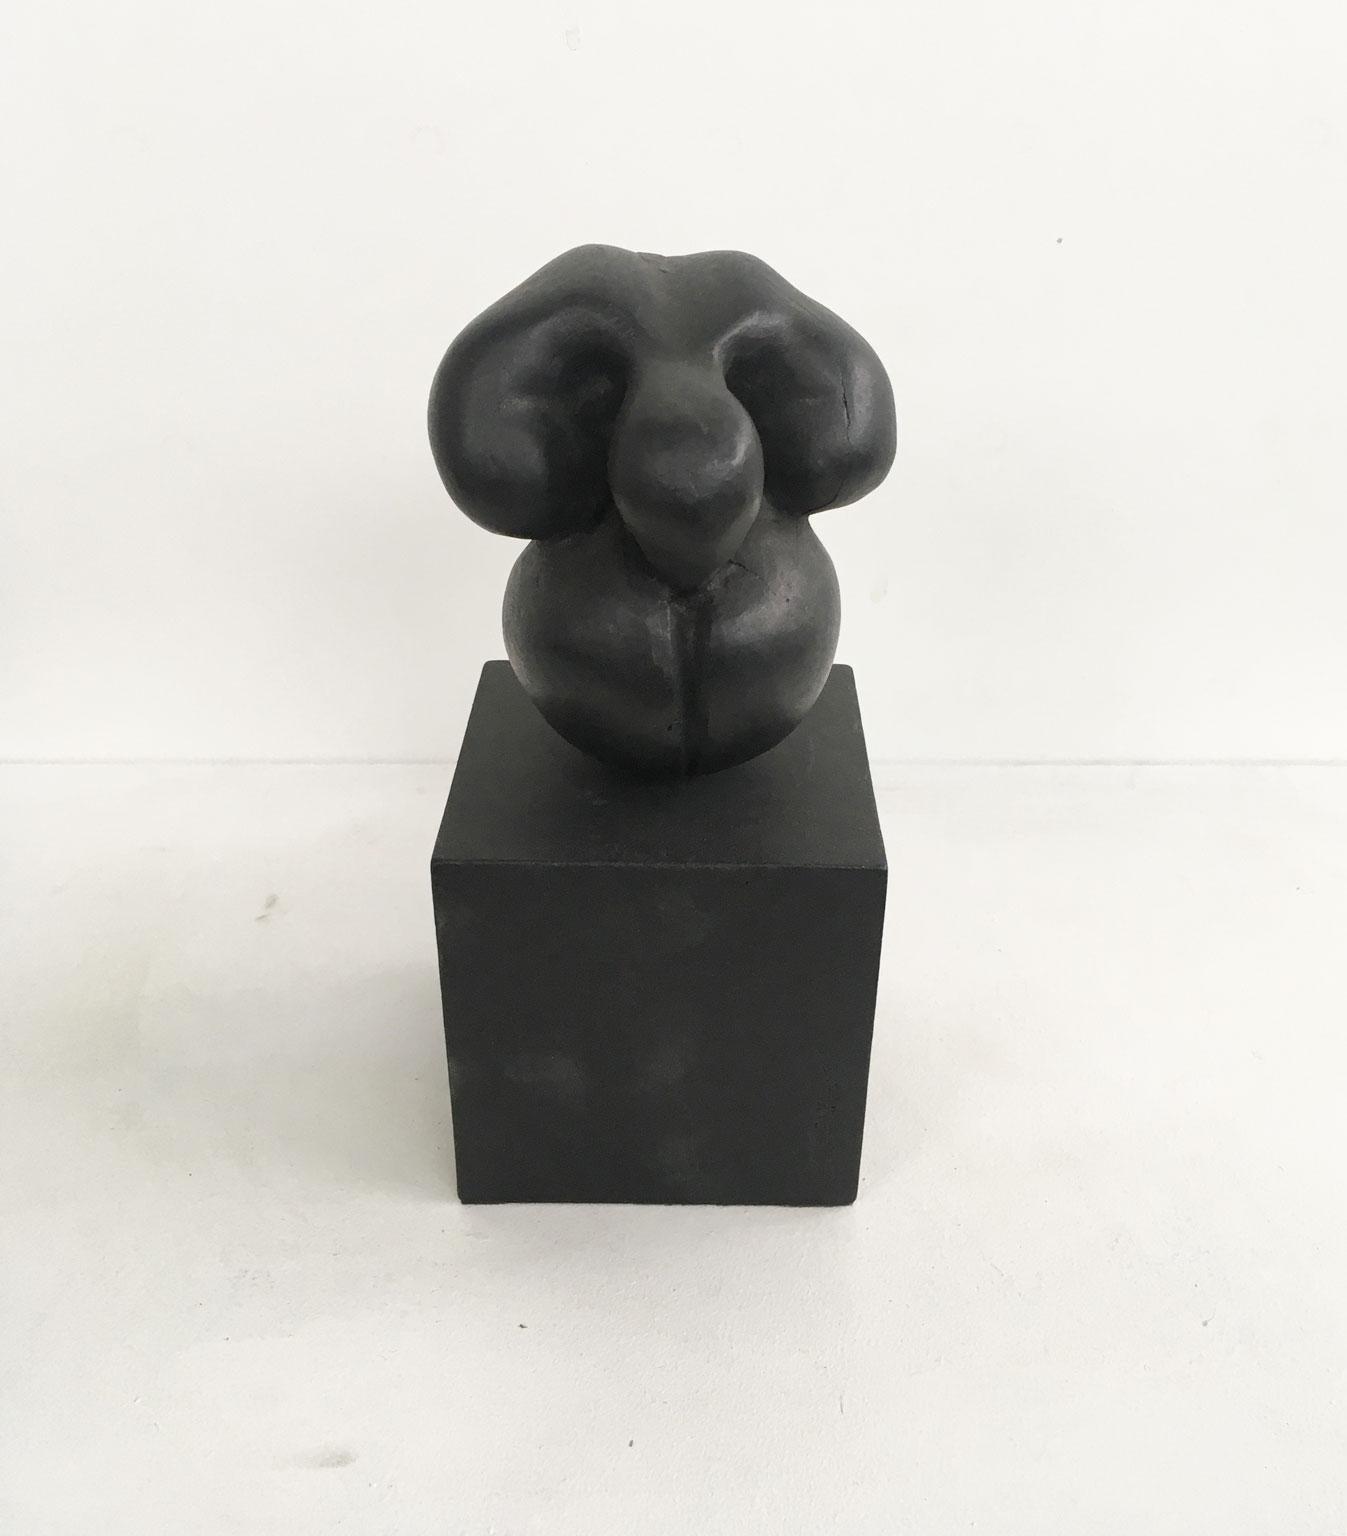 1988 Italy Black Aluminum Abstract Sculpture by Patrizia Guerresi Title Deji For Sale 5